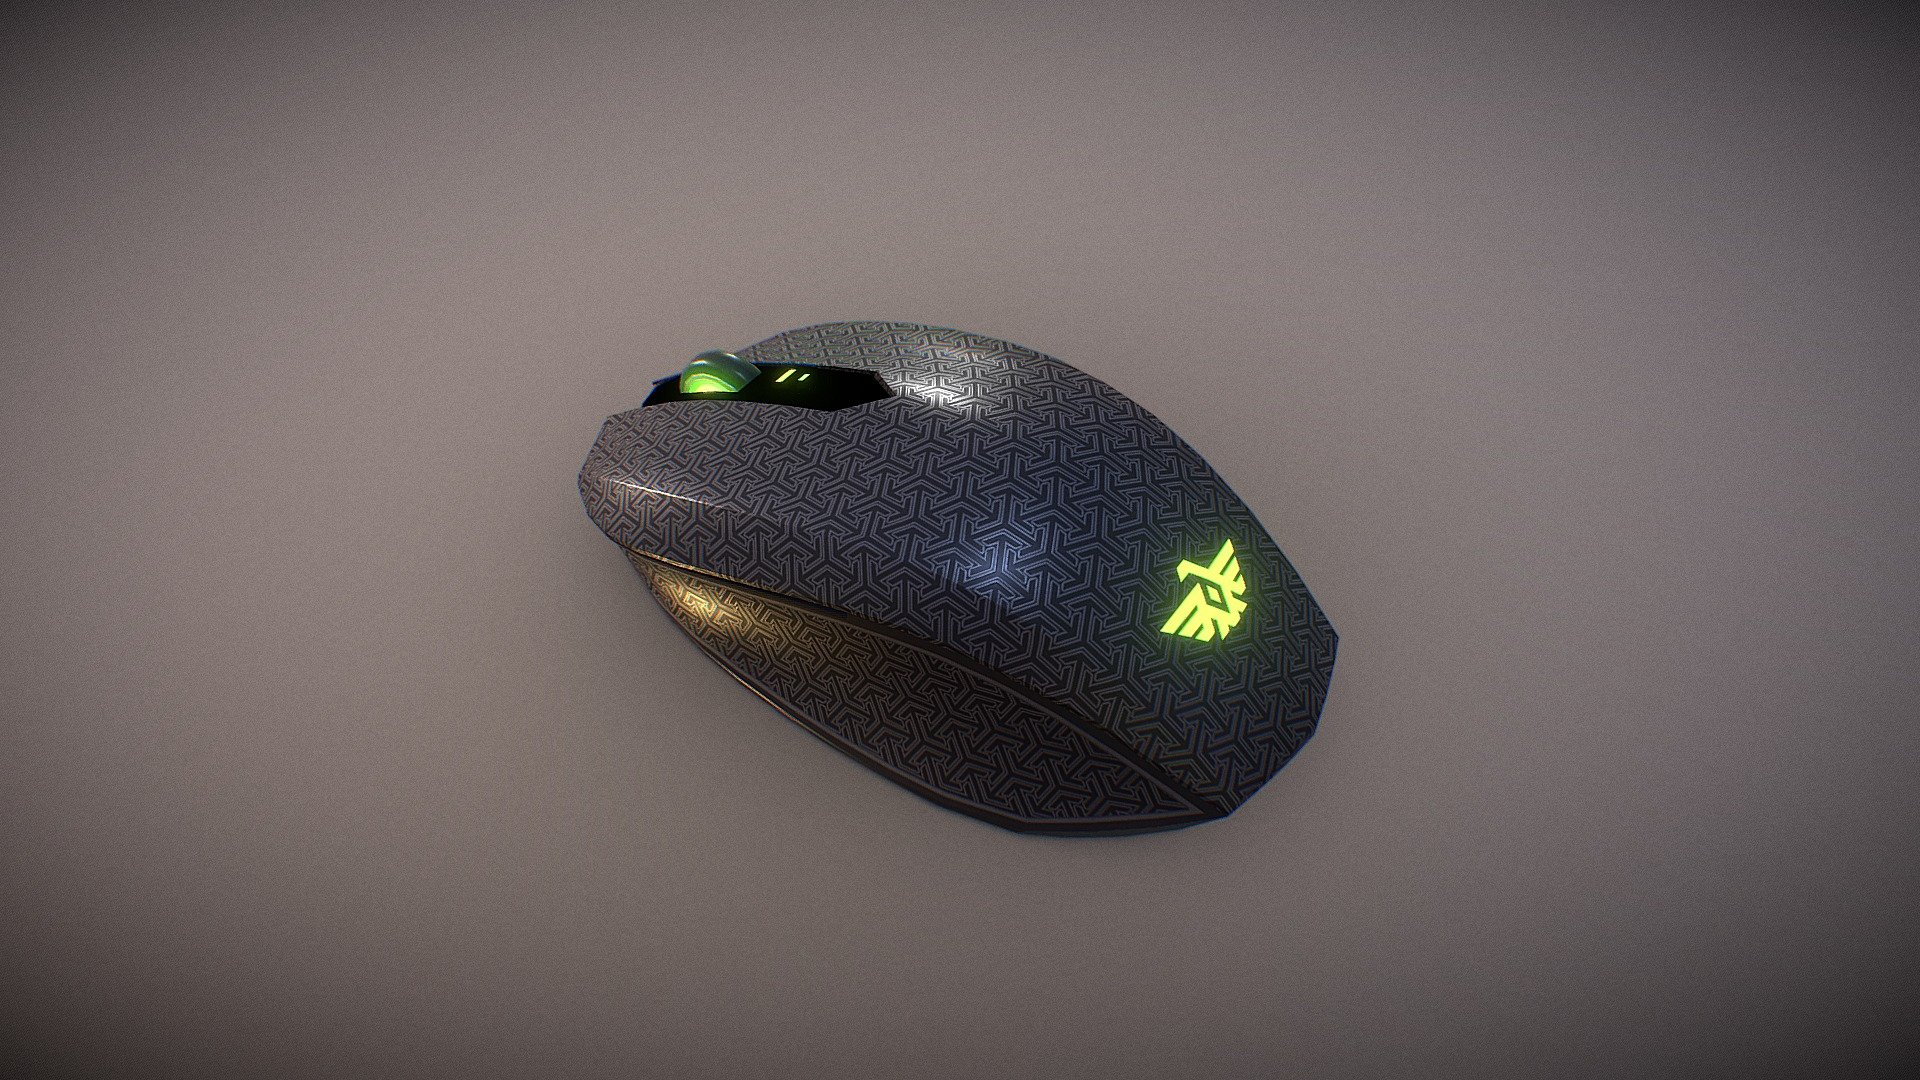 PC Mouse type-R

There's no need to credit me
use &amp; distribute it as you like.

for commercial or non comercial use.

Cheers 3d model